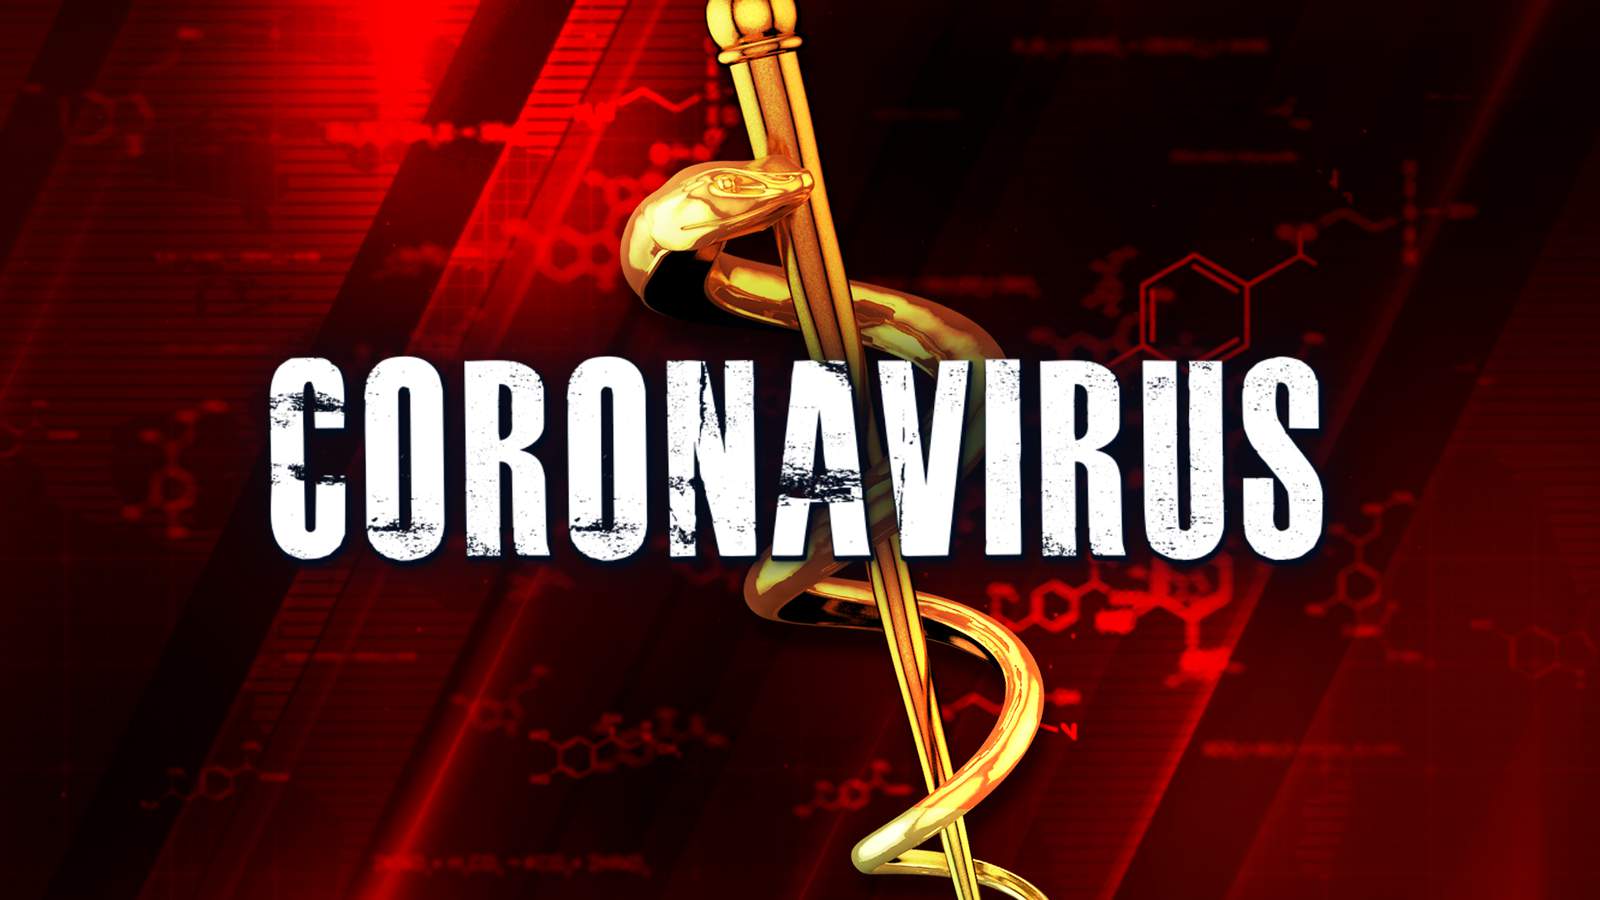 US Marine in Virginia Tested Positive for Coronavirus, in State’s First Confirmed Case